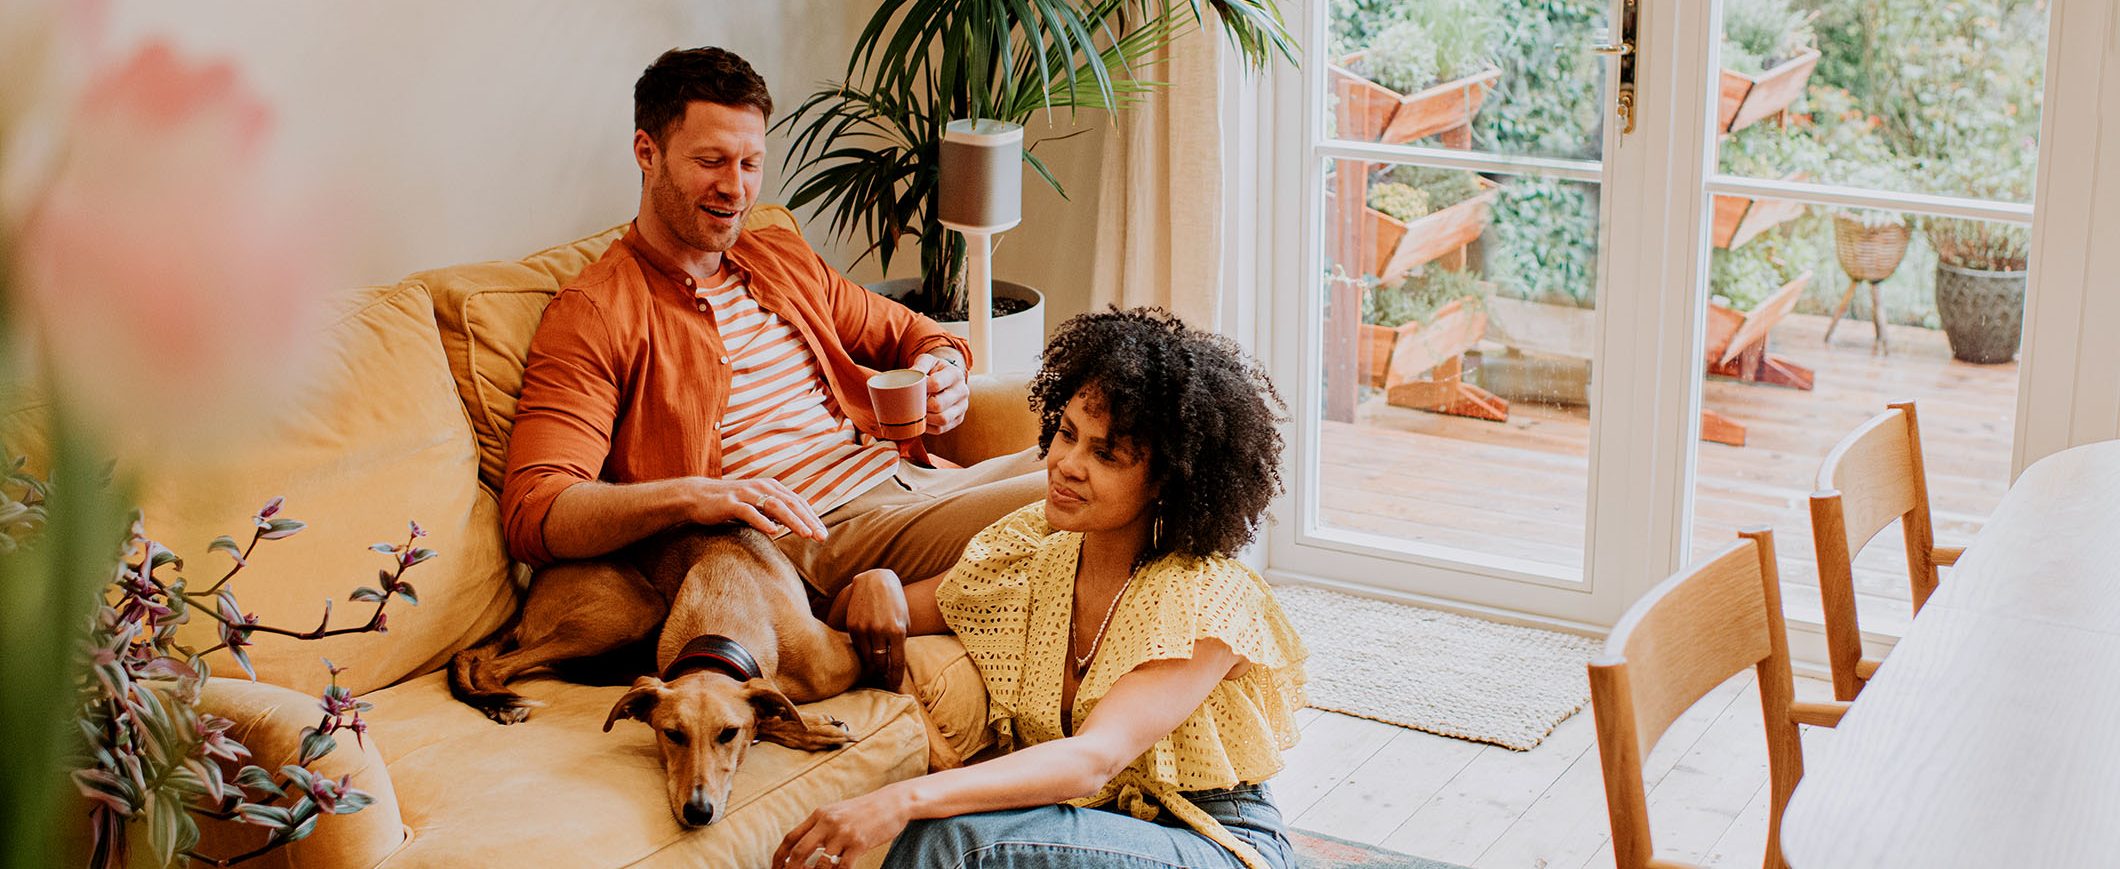 A man and woman relax with their dog on a sofa, with glass doors and plants in the background.